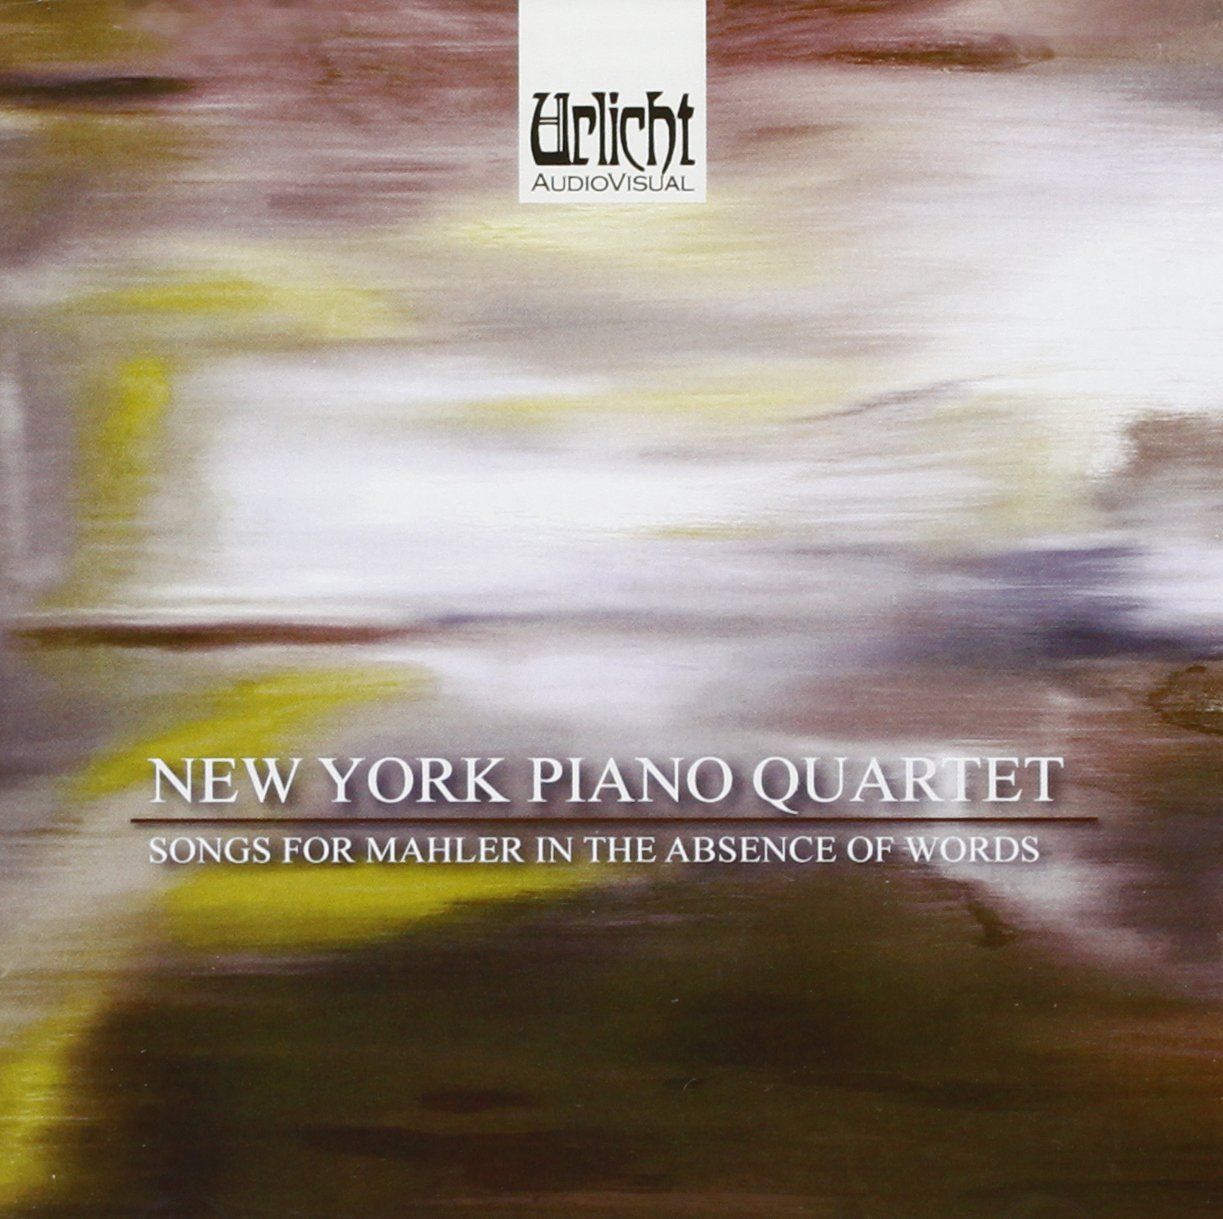 SONGS FOR MAHLER IN THE ABSENCE OF WORDS - NEW YORK PIANO QUARTET